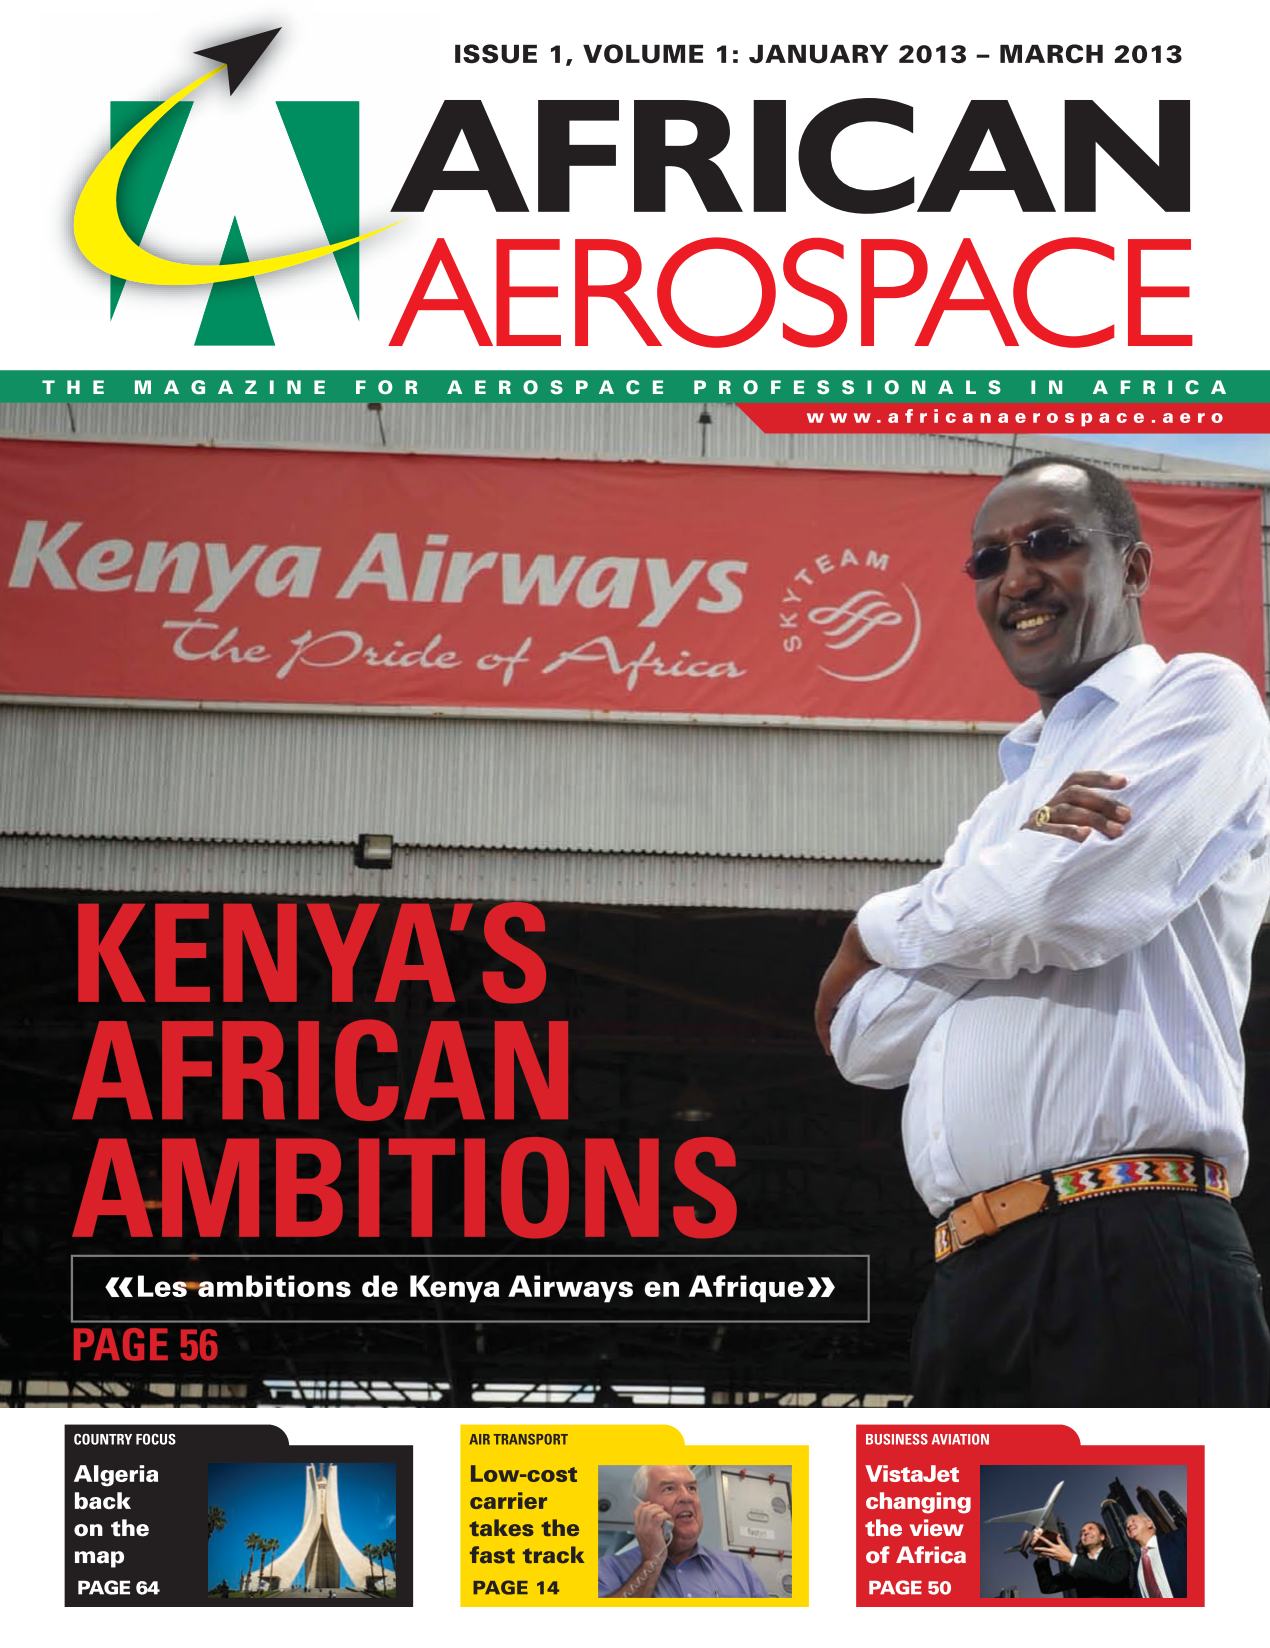 African Aerospace: January - March 2013